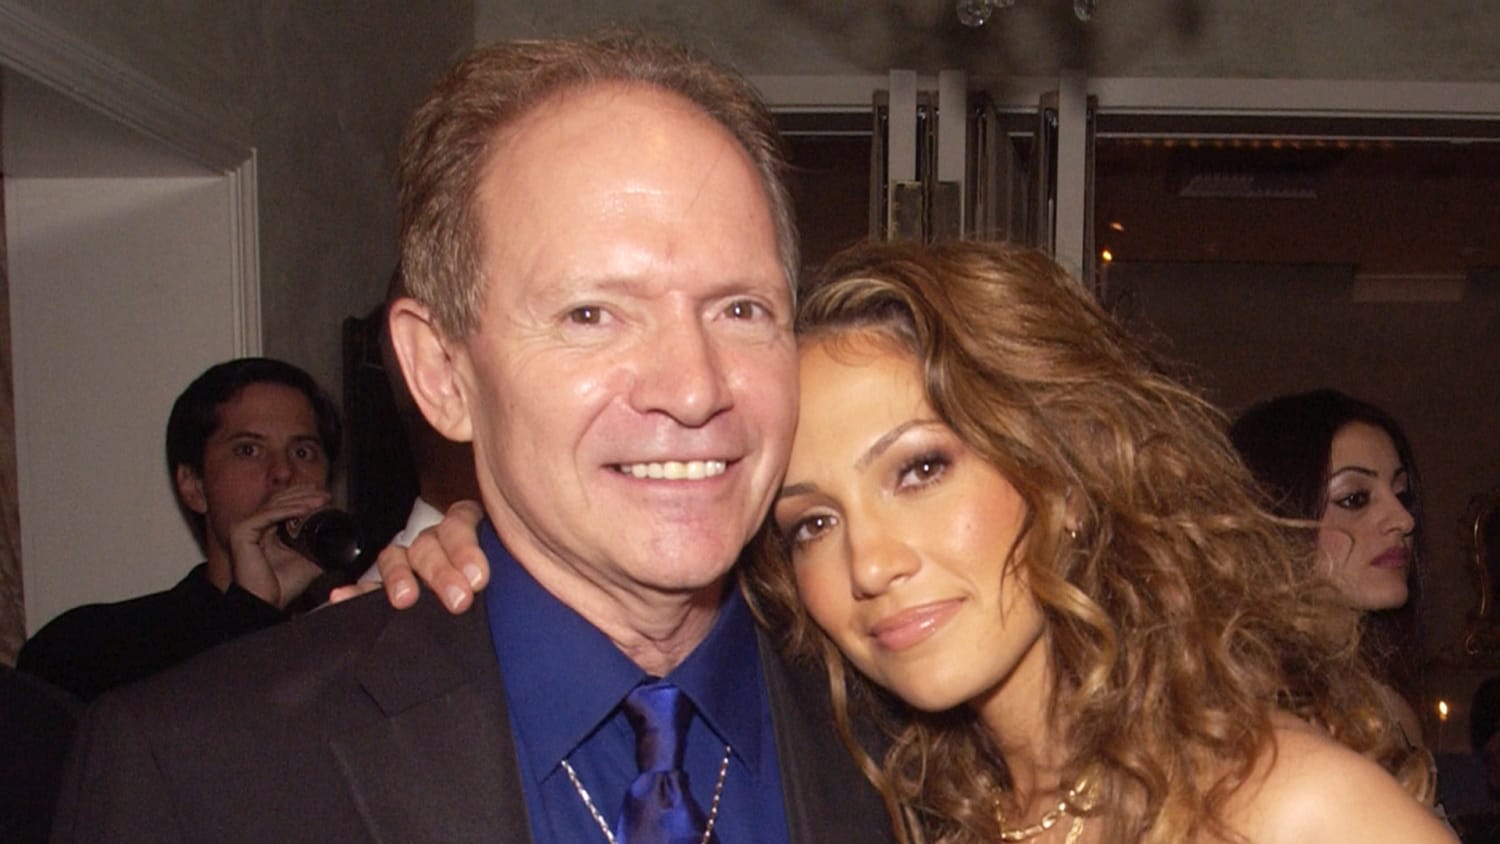 Jennifer Lopez opens up about her dad: 'He was just proud of me'